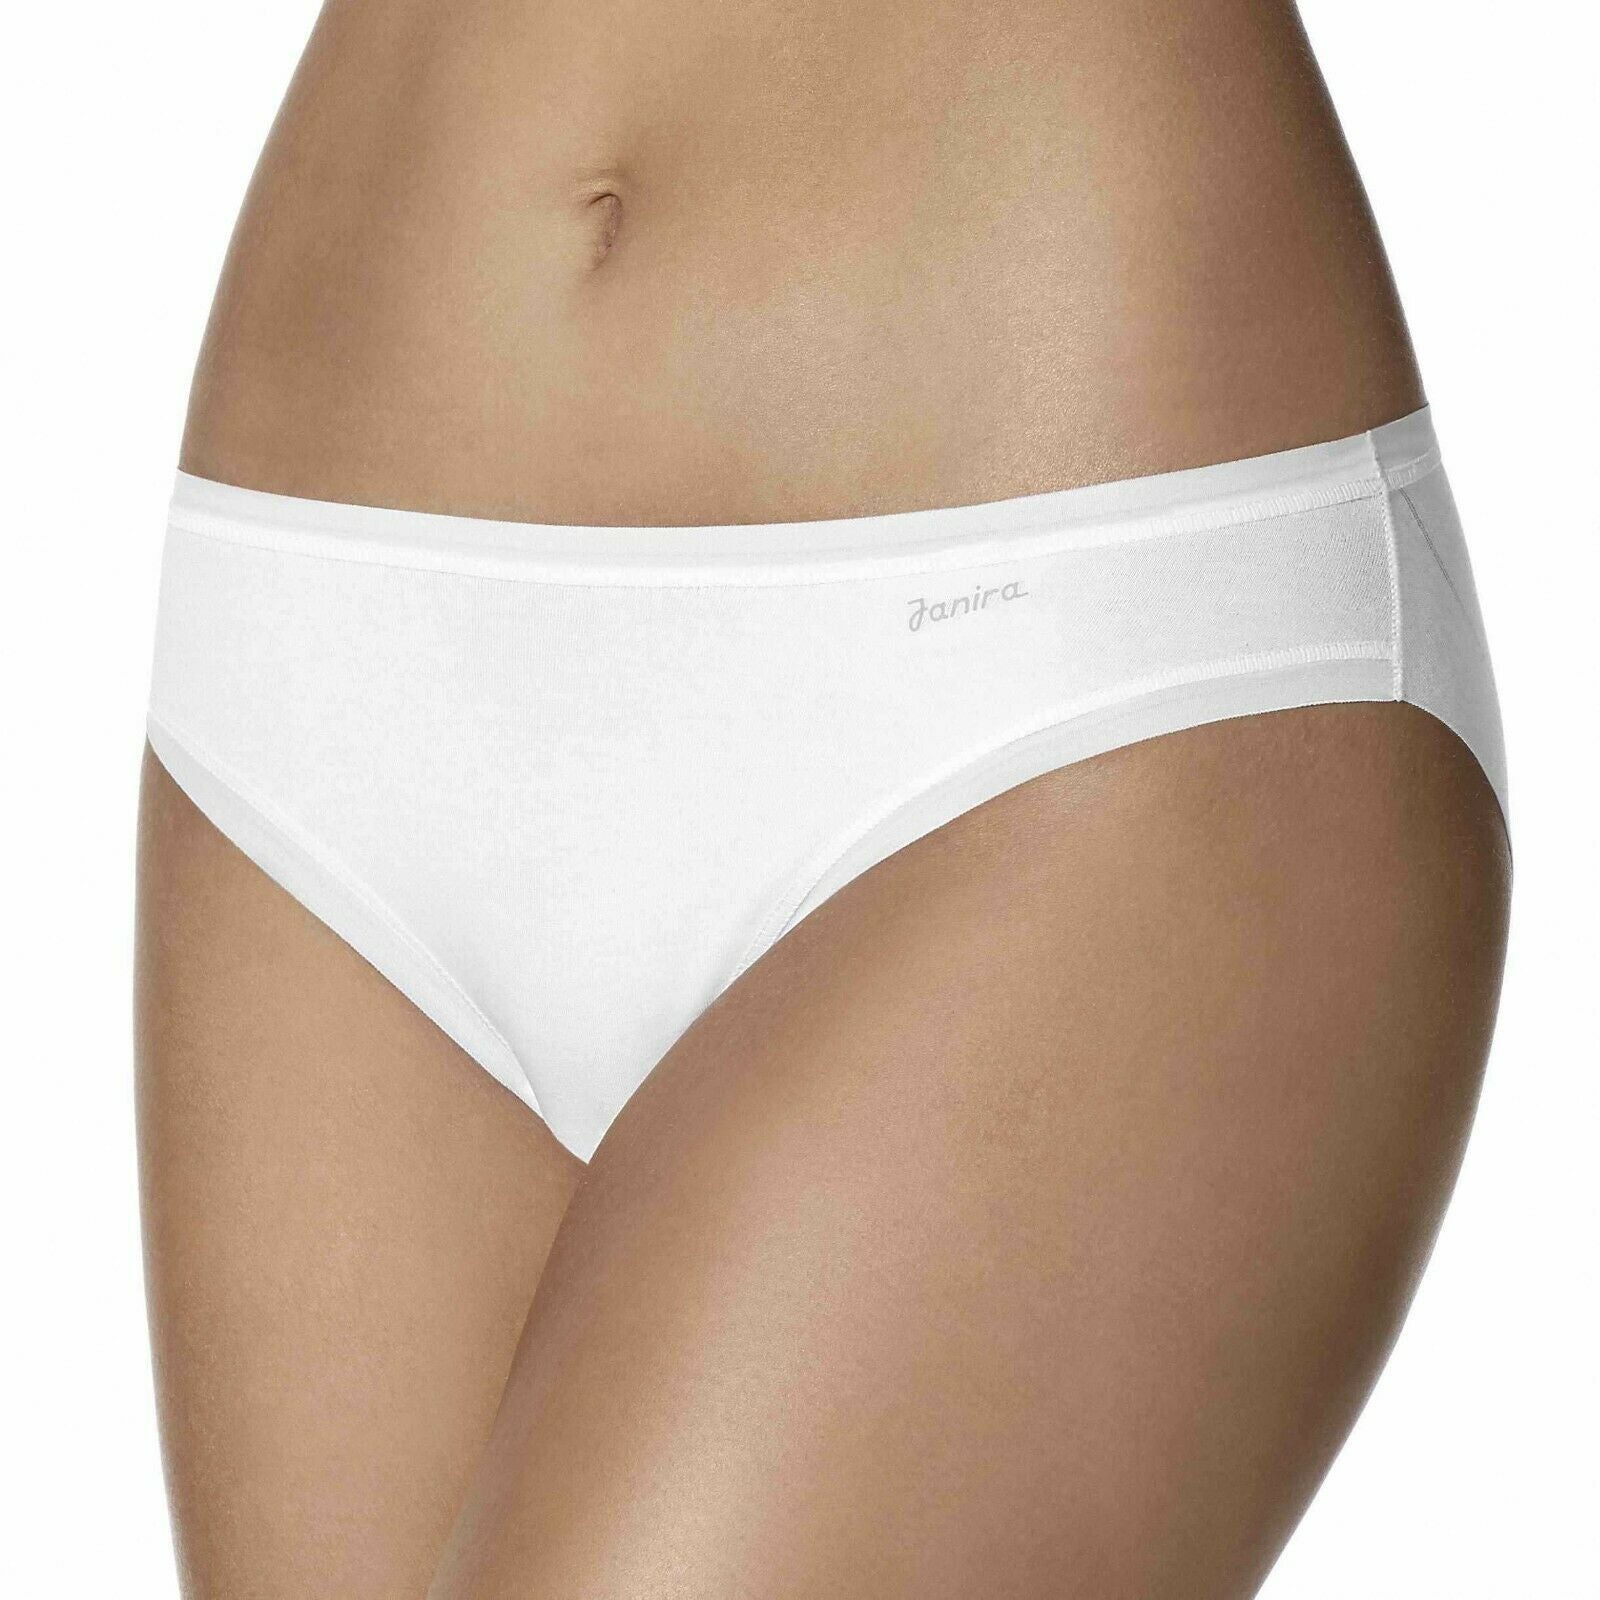 Buy Black/White/Nude Midi No VPL Knickers 3 Pack from Next Ireland